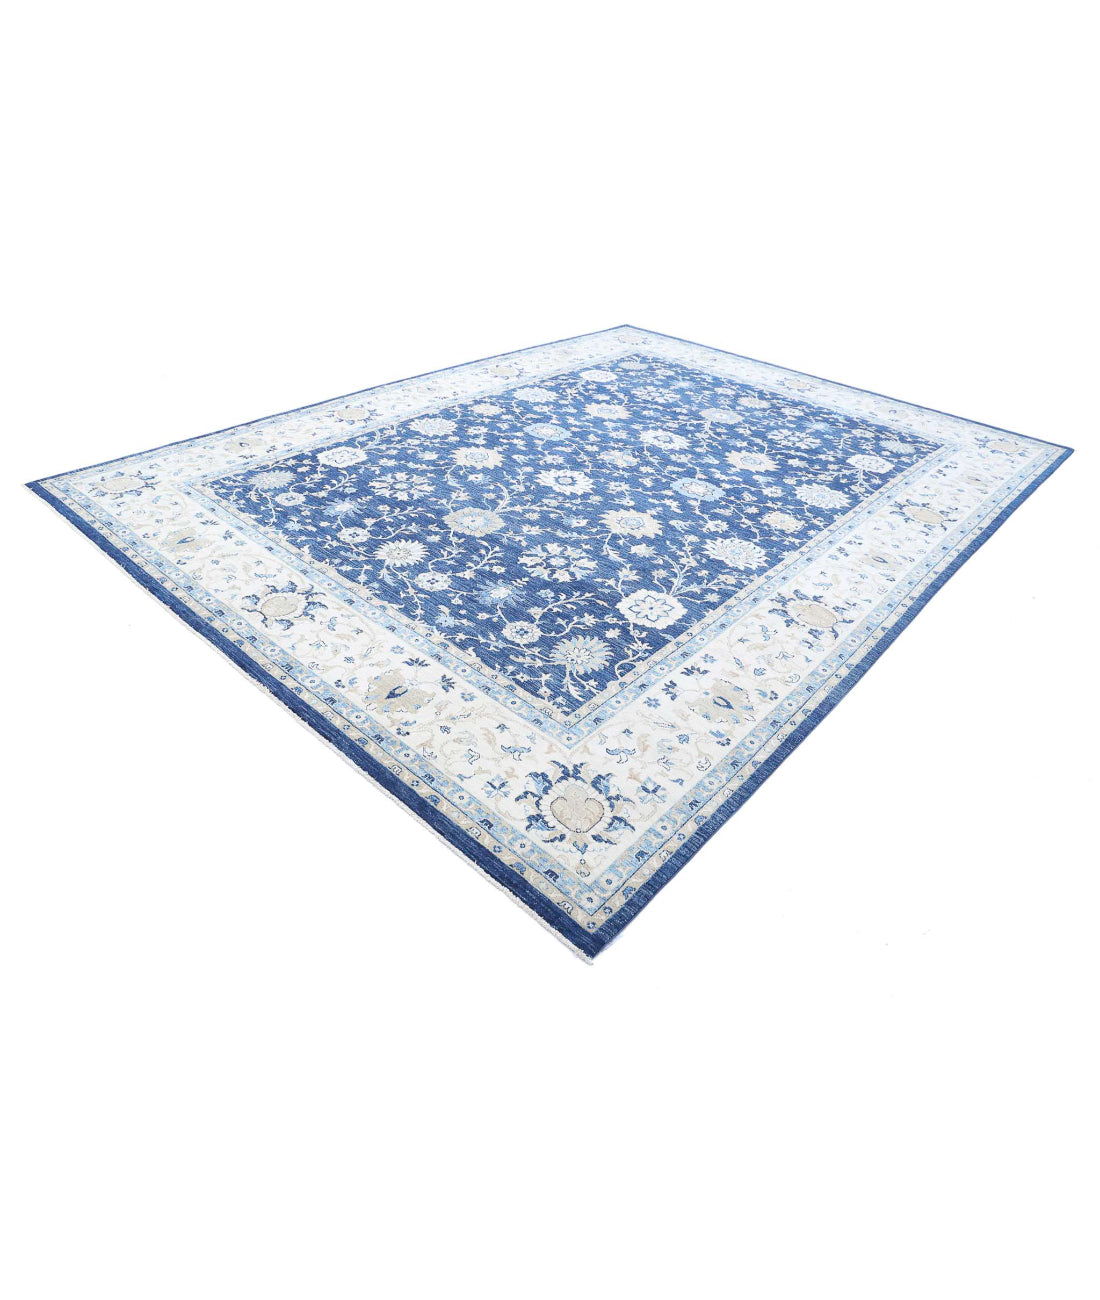 Ziegler 9'11'' X 13'5'' Hand-Knotted Wool Rug 9'11'' x 13'5'' (298 X 403) / Blue / Ivory